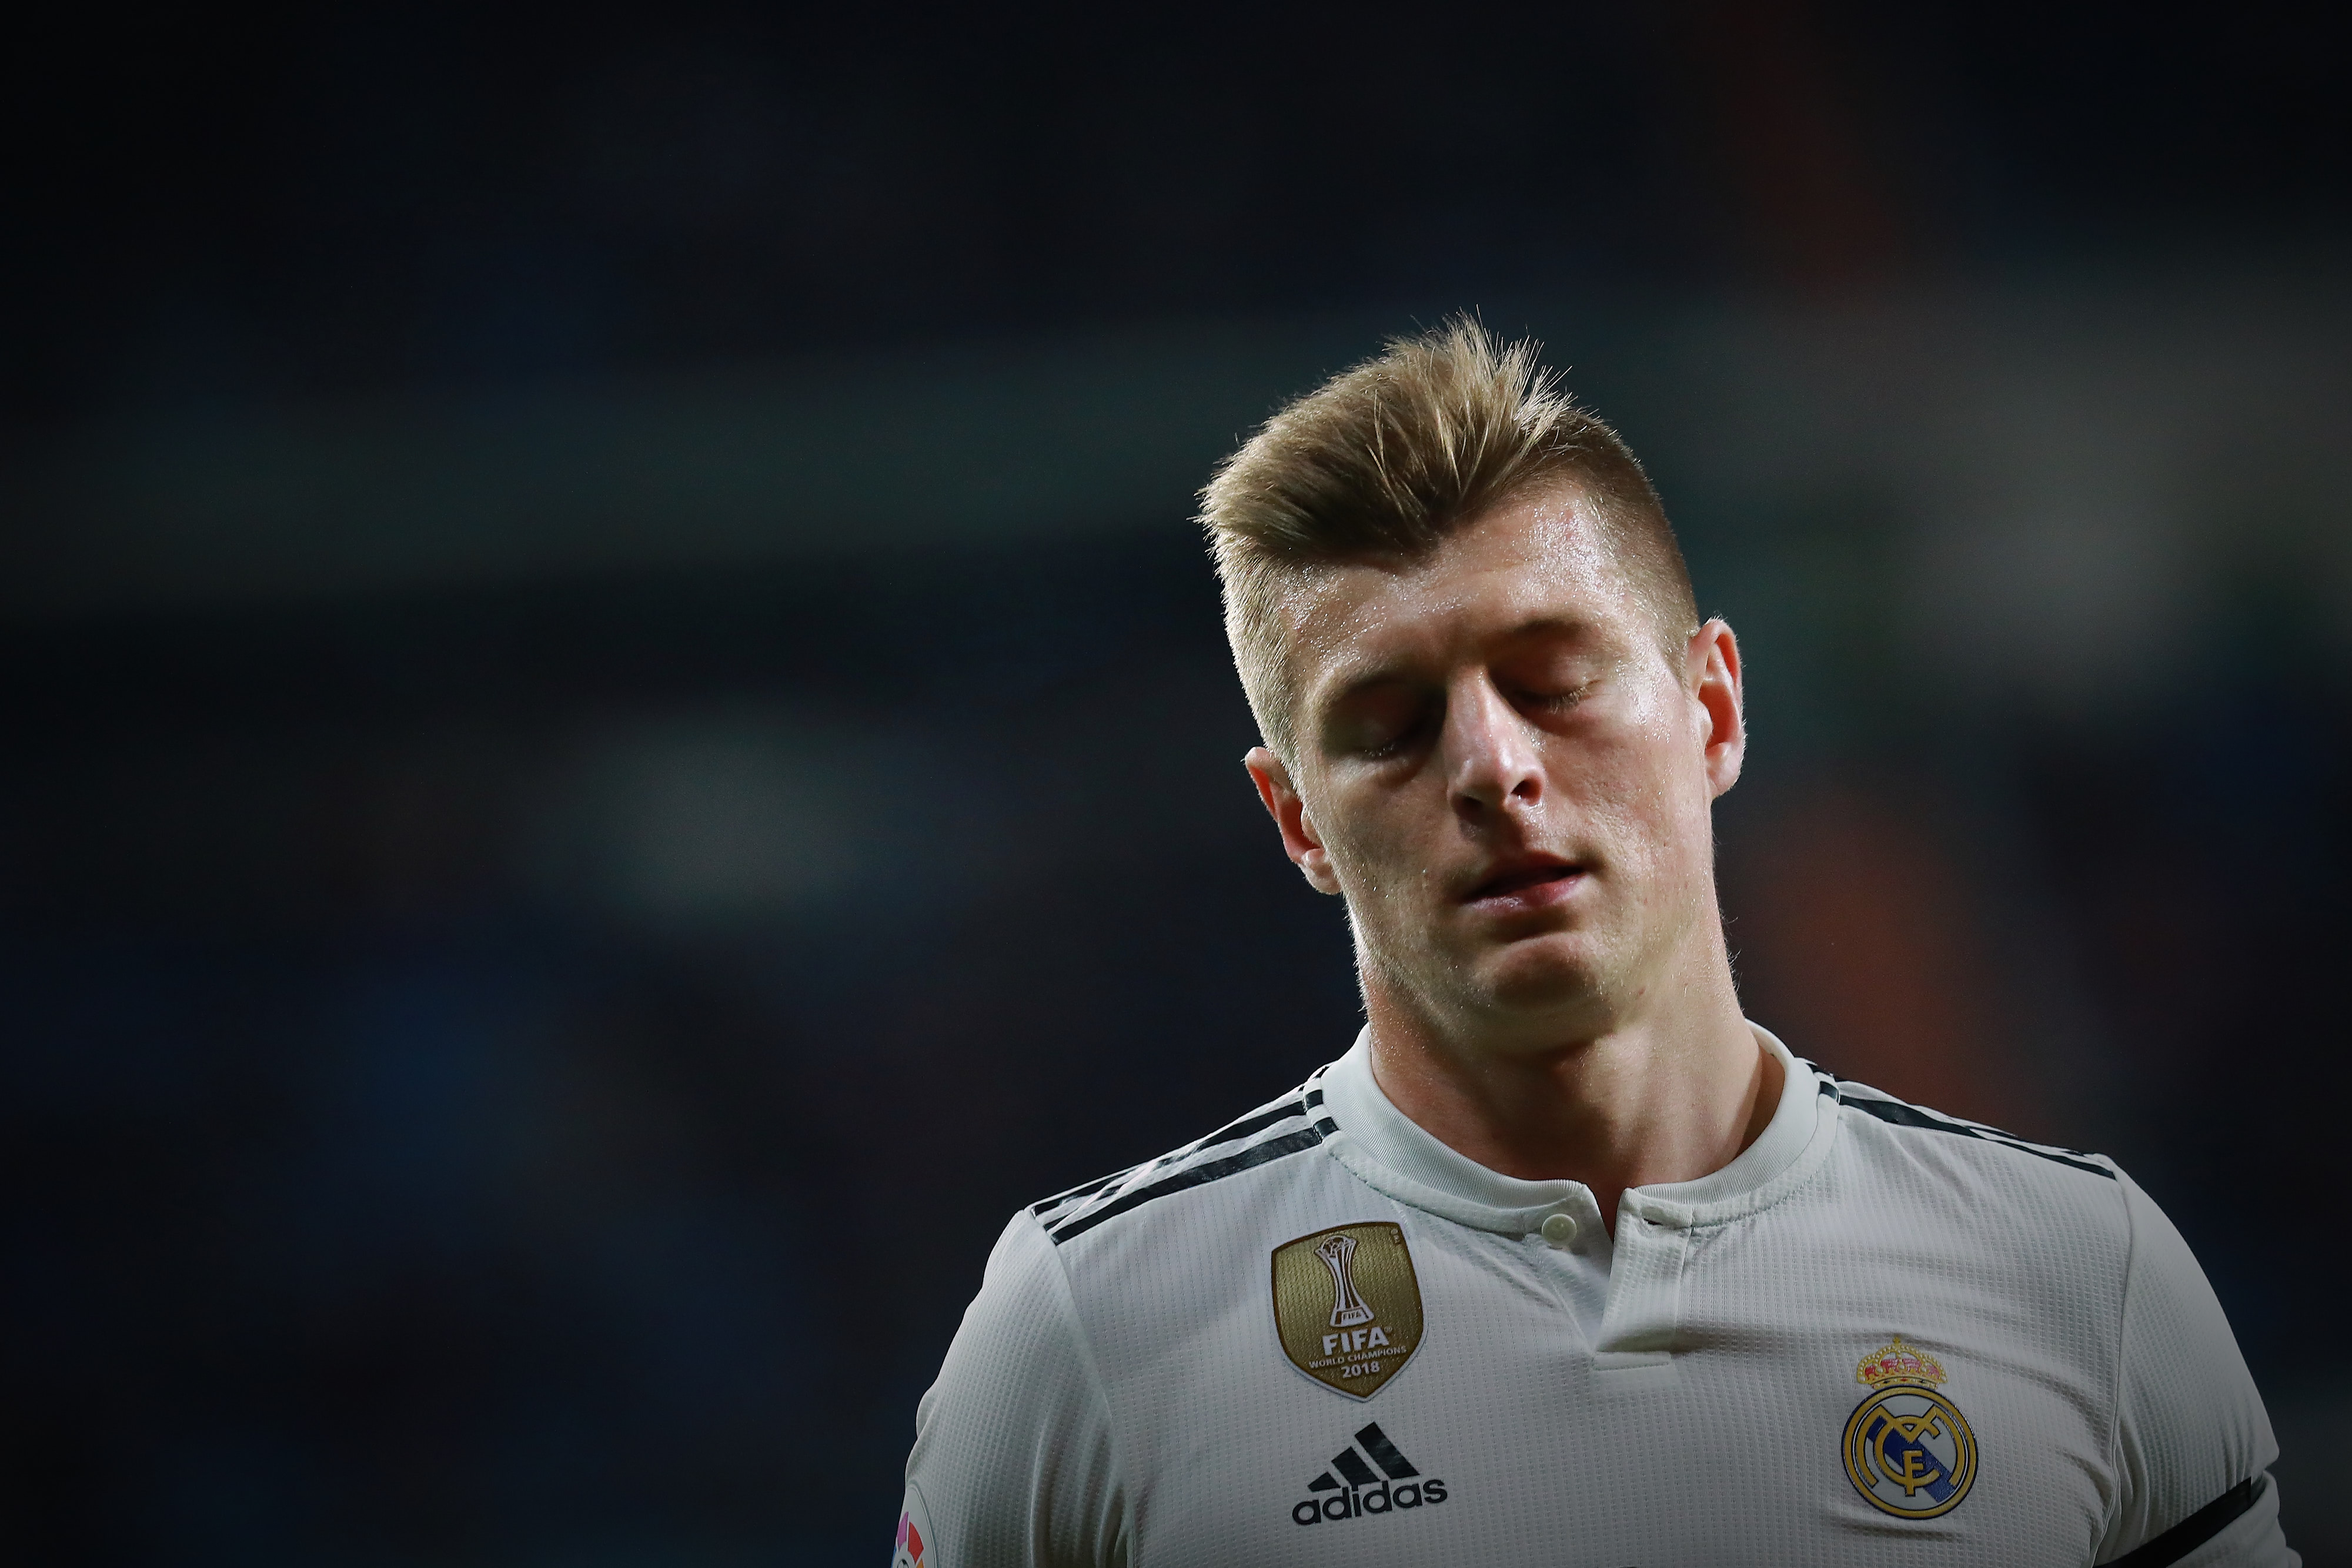 MADRID, SPAIN - JANUARY 06:  Toni Kroos of Real Madrid CF reacts during the La Liga match between Real Madrid CF and Real Sociedad de Futbol at Estadio Santiago Bernabeu on January 06, 2019 in Madrid, Spain. (Photo by Gonzalo Arroyo Moreno/Getty Images)